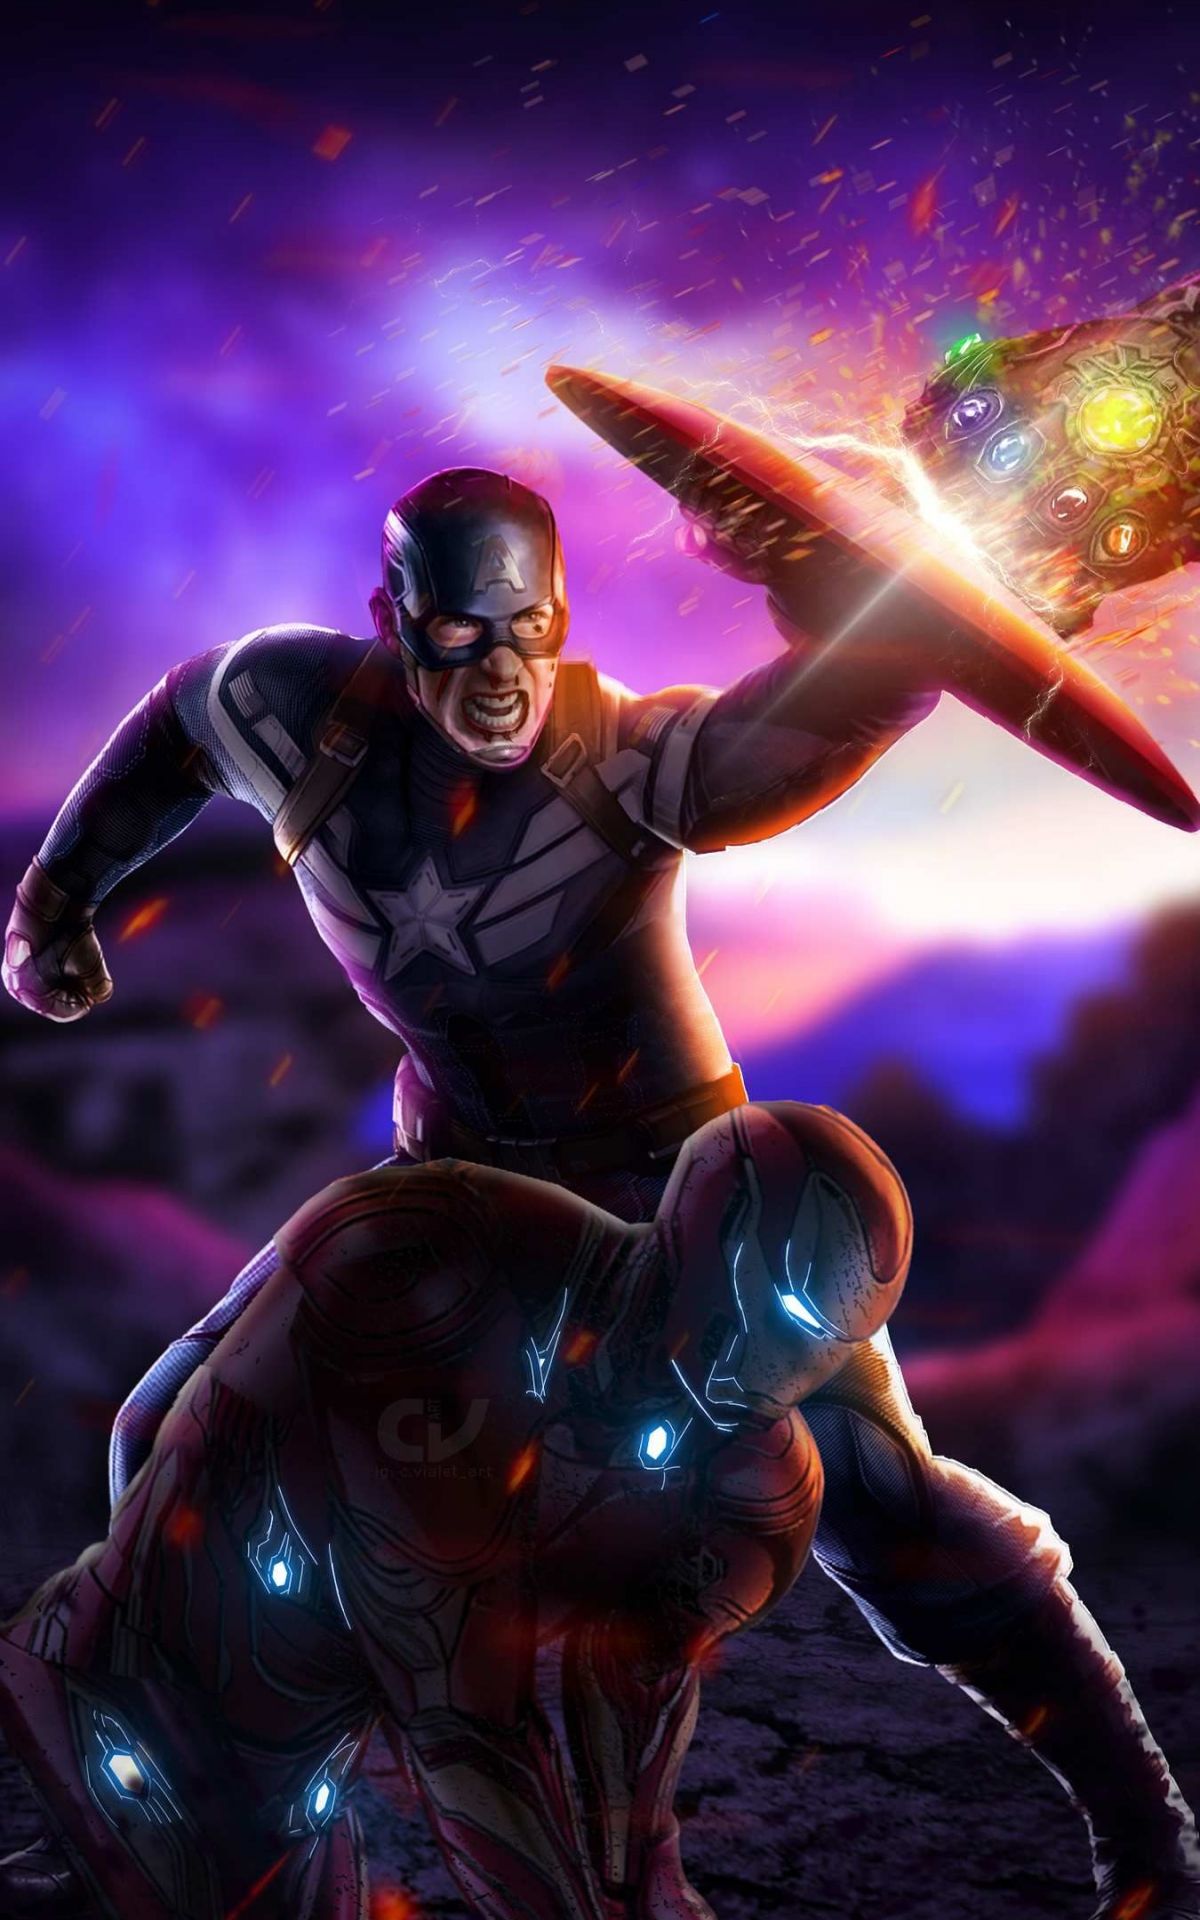 Free download Captain and Tony Fighting Thanos Avengers Endgame